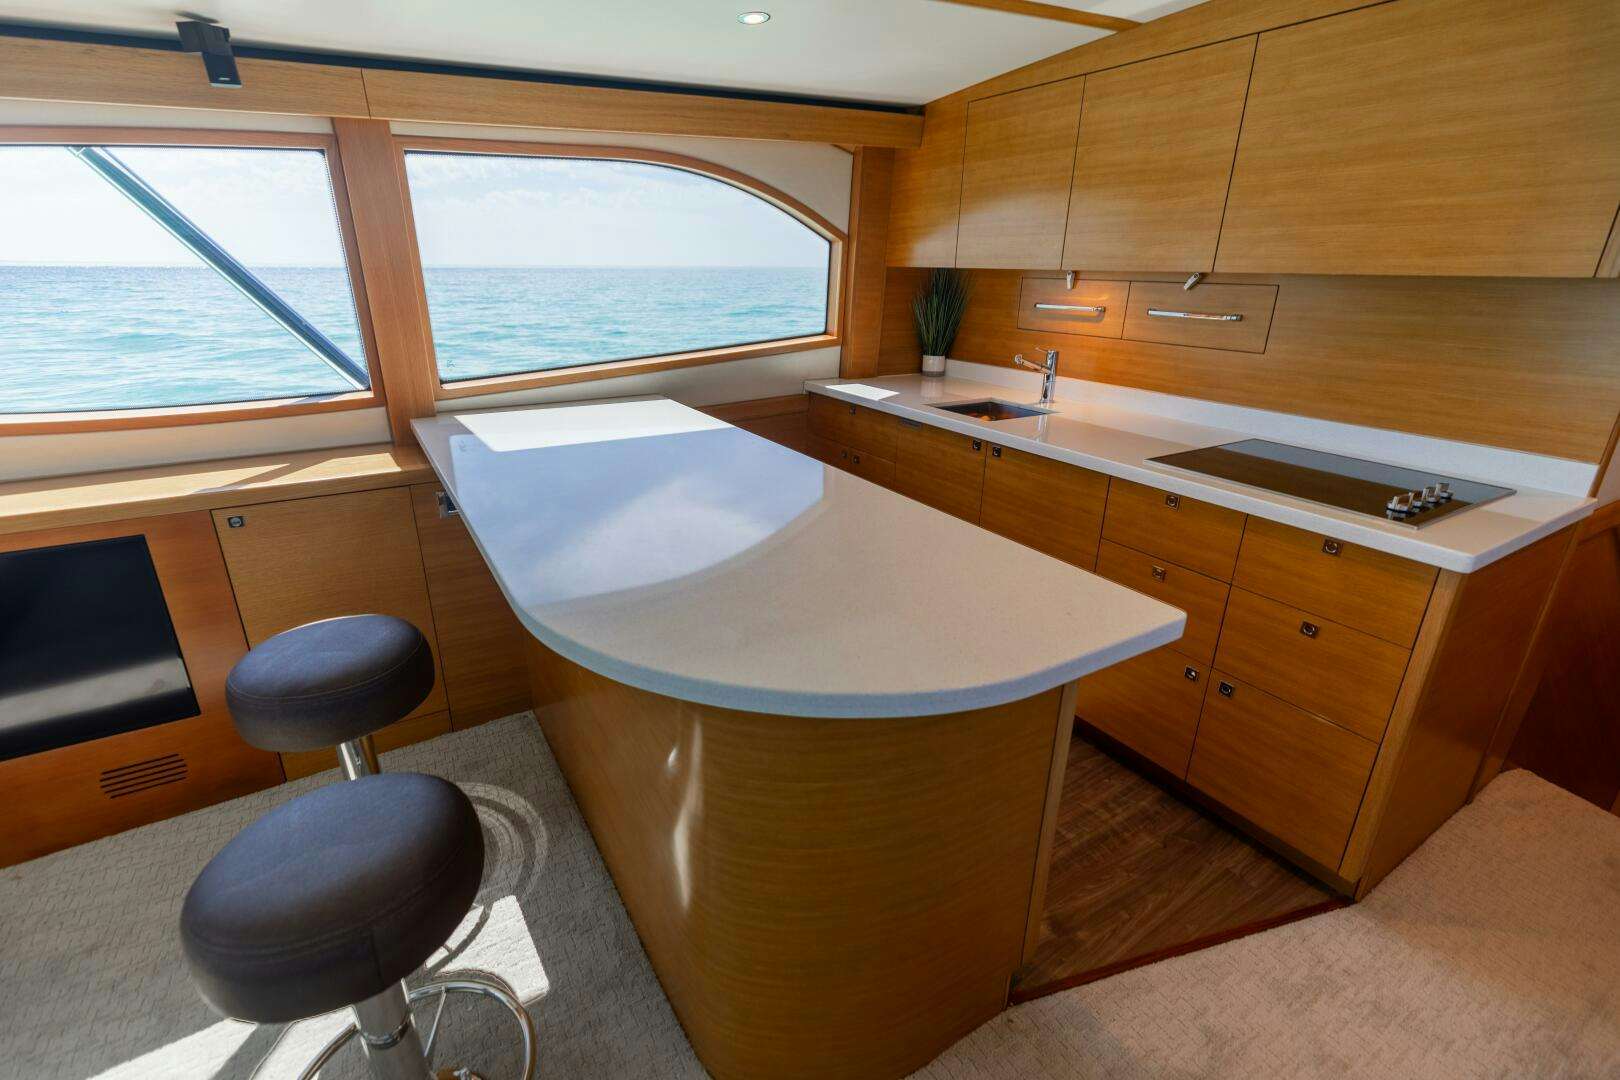 Knot on call
Yacht for Sale